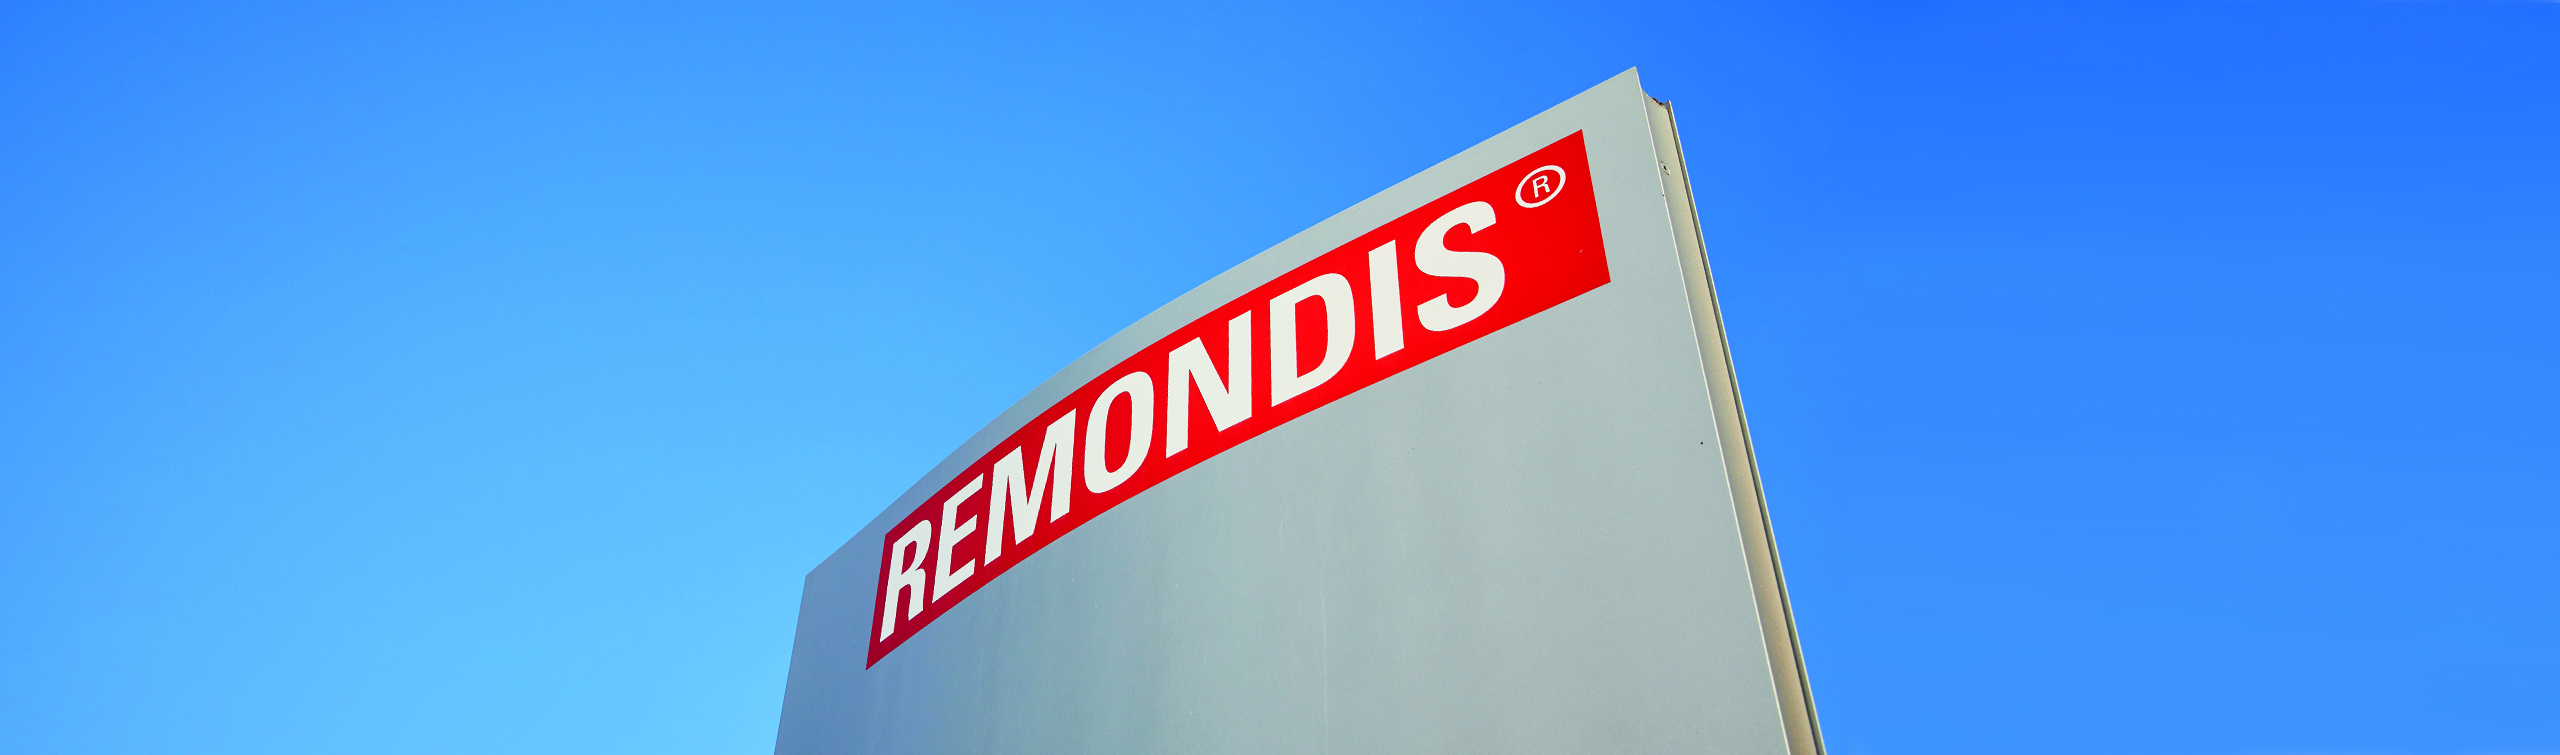 REMONDIS has largely discontinued business activities in Russia